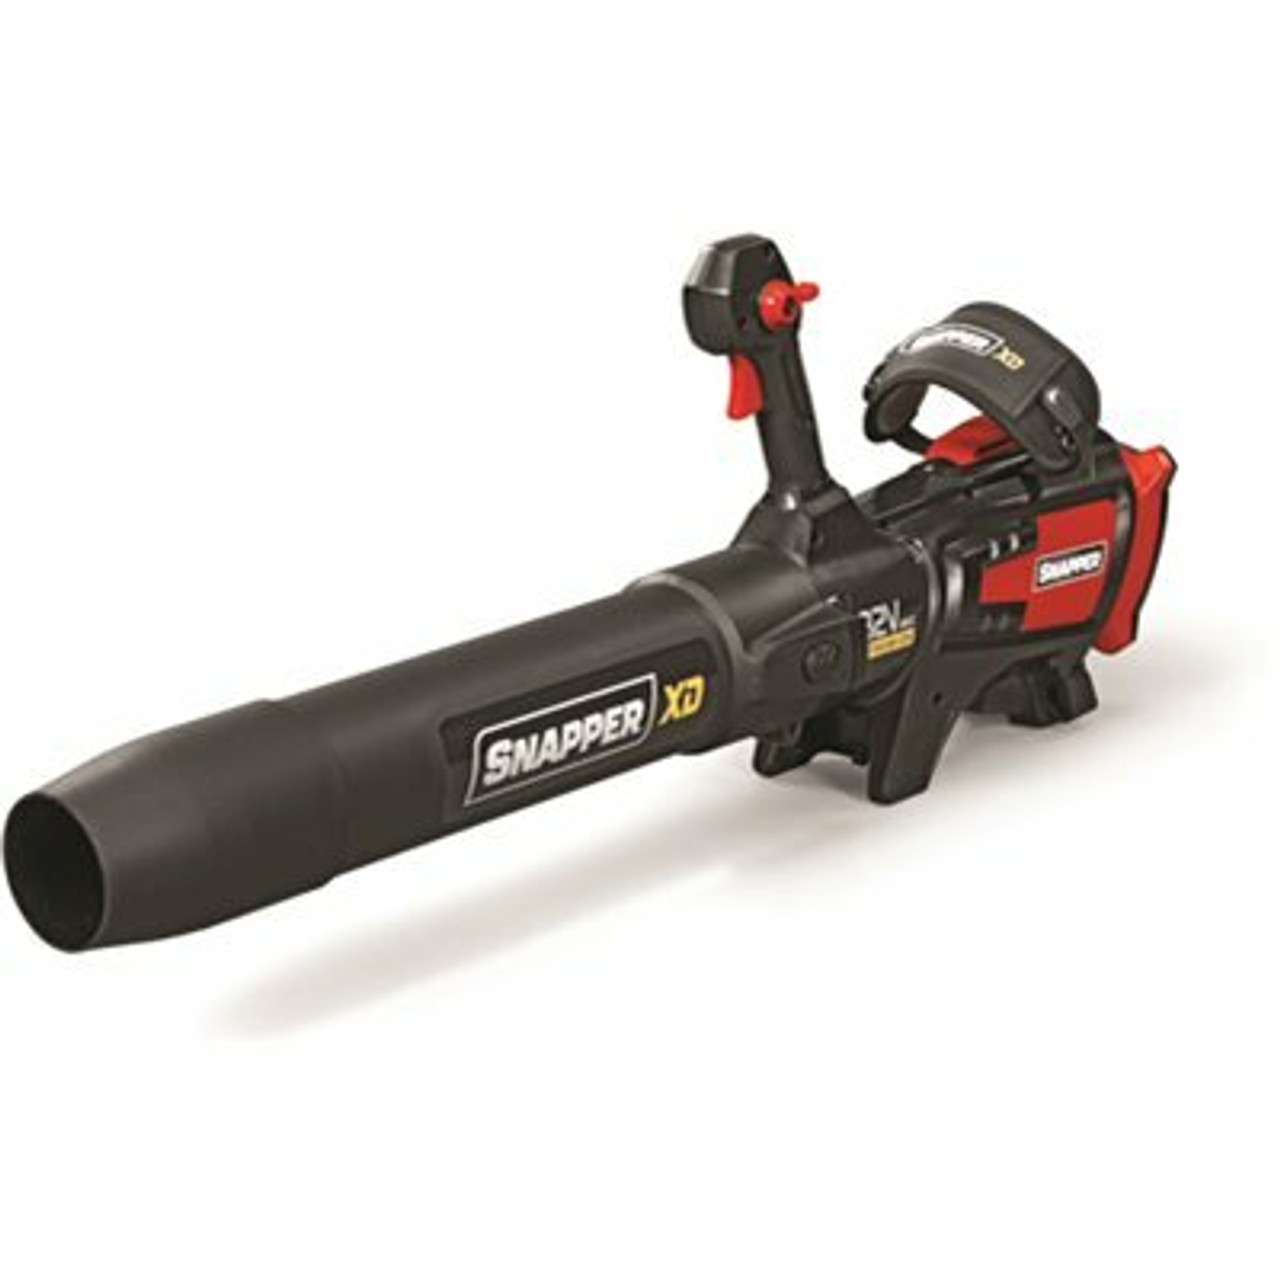 Snapper Xd Powergrip Max 140 Mph, Max 700 Cfm Lithium-Ion Cordless Leaf Blower Tool, Battery And Charger Not Included